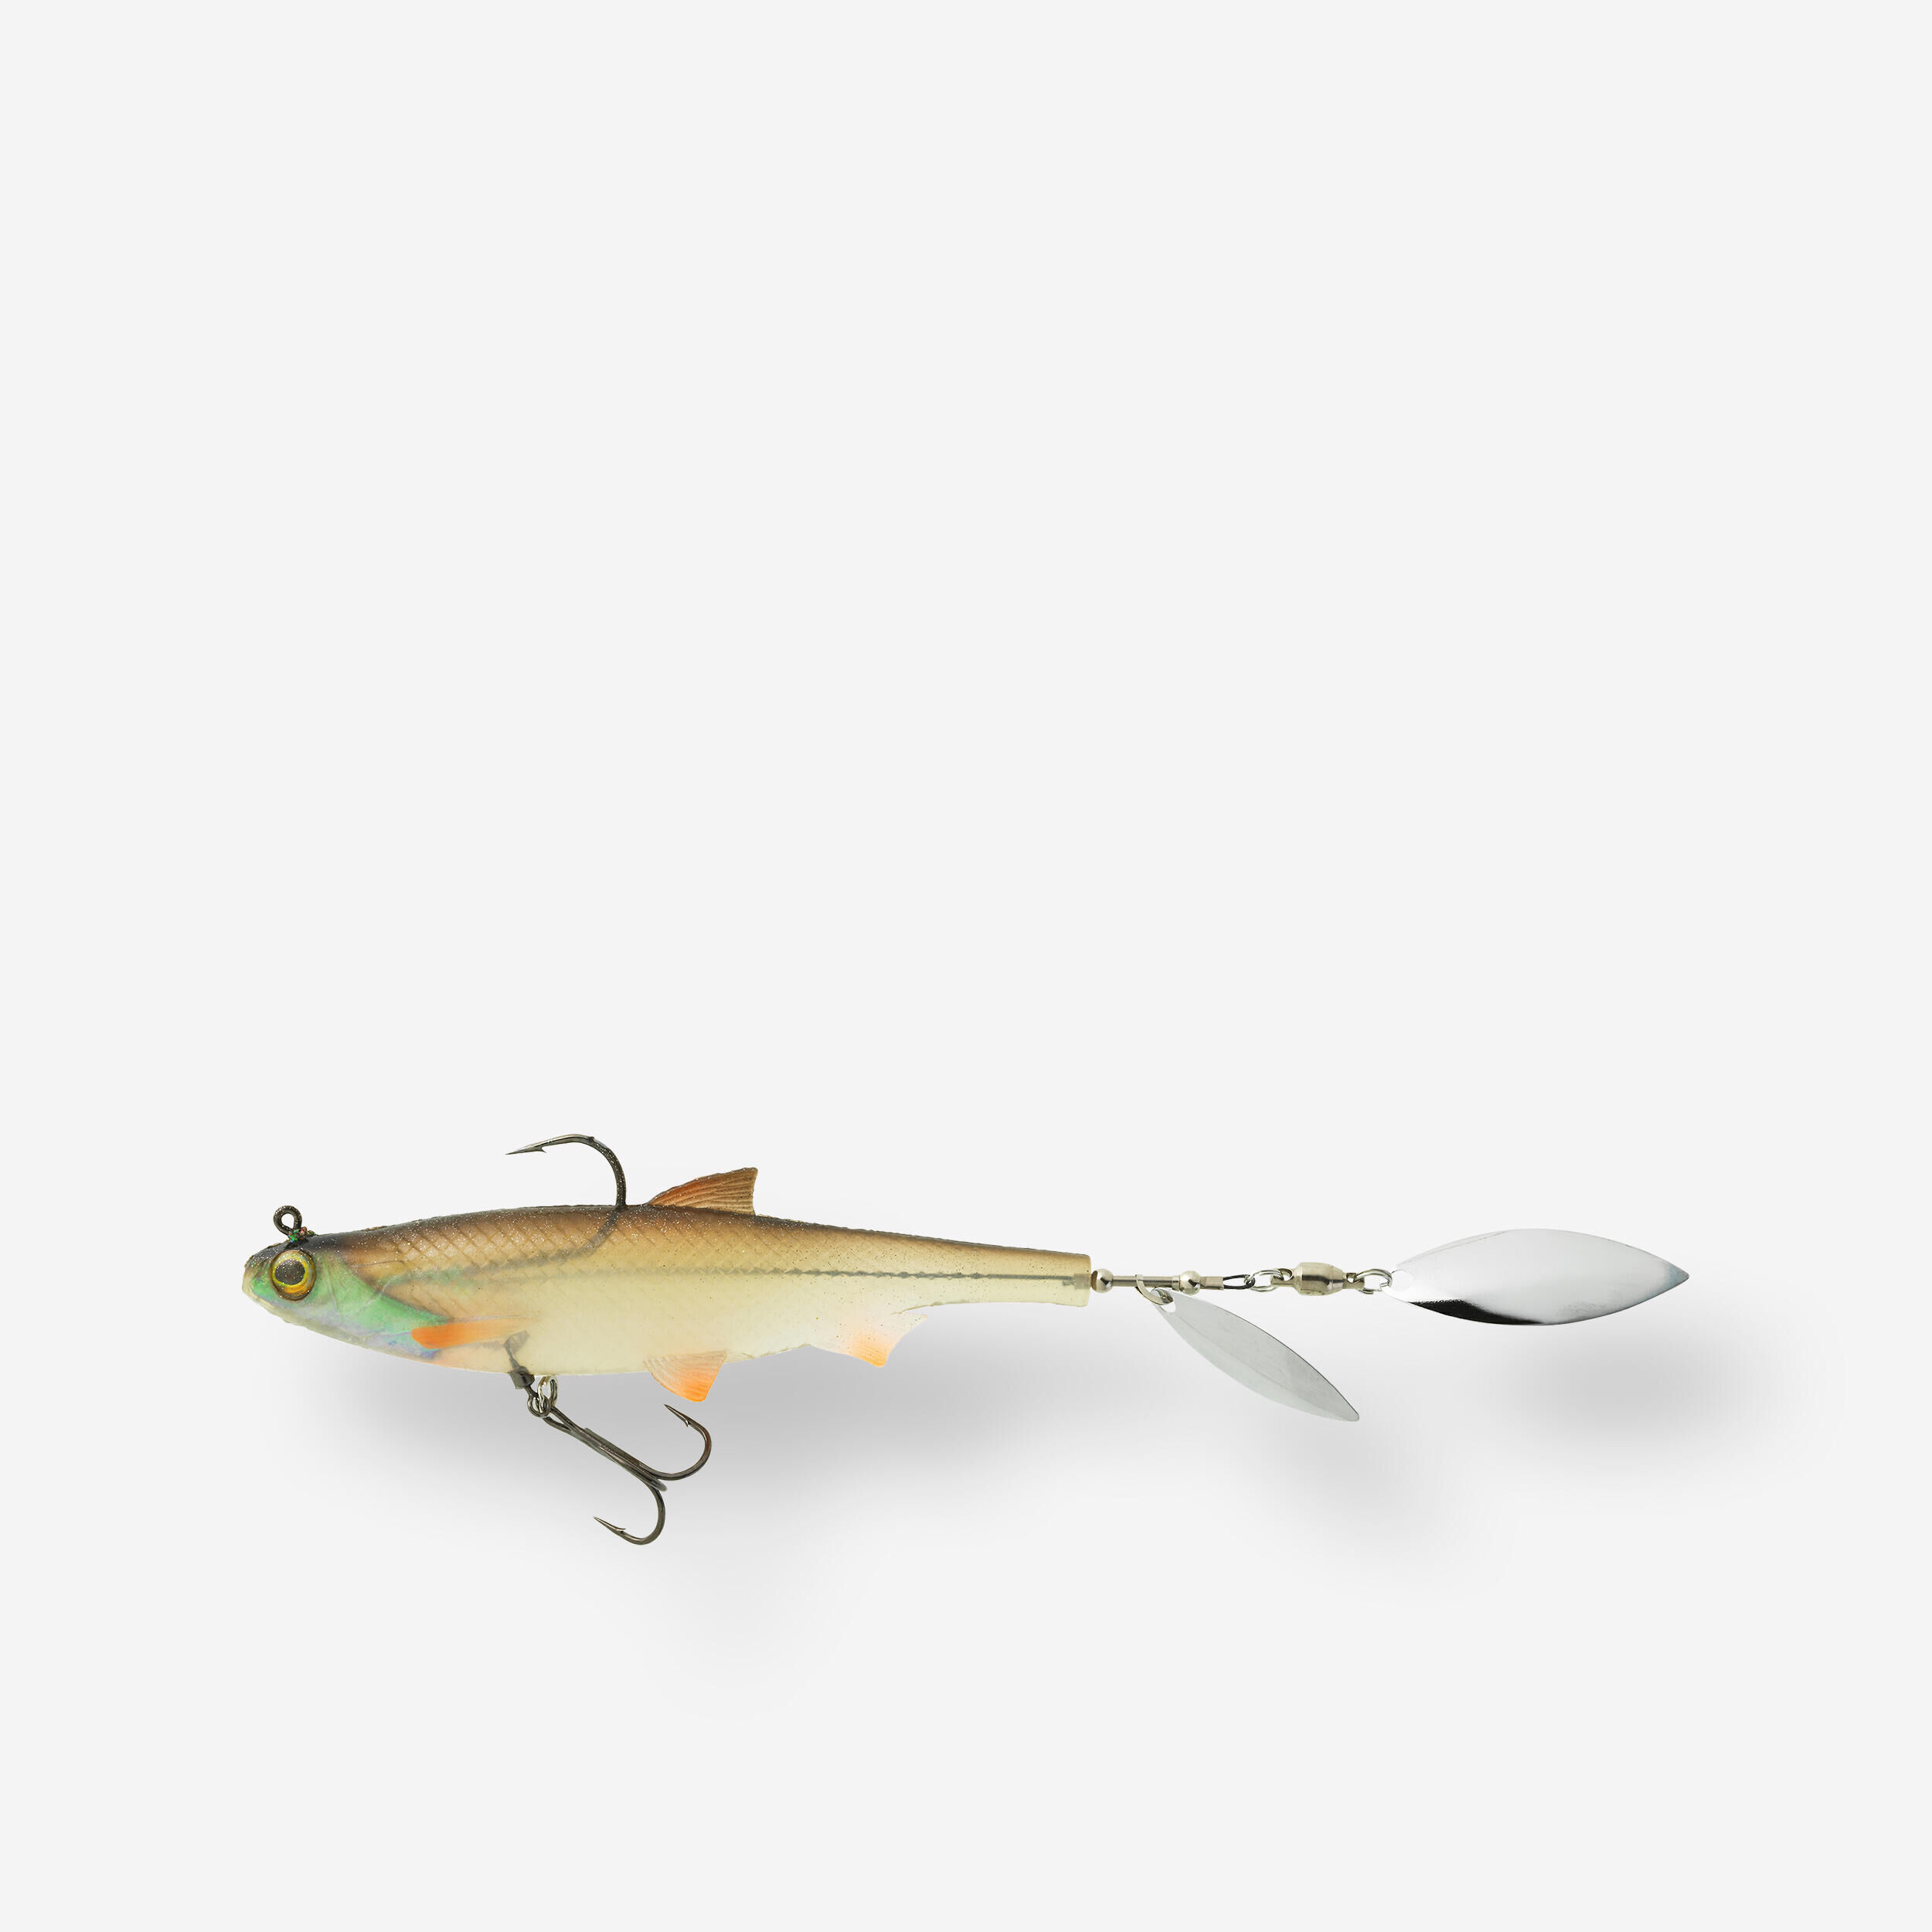 CAPERLAN LURE FISHING ROACHSPIN 120 ROACH BLADED SHAD SOFT LURE